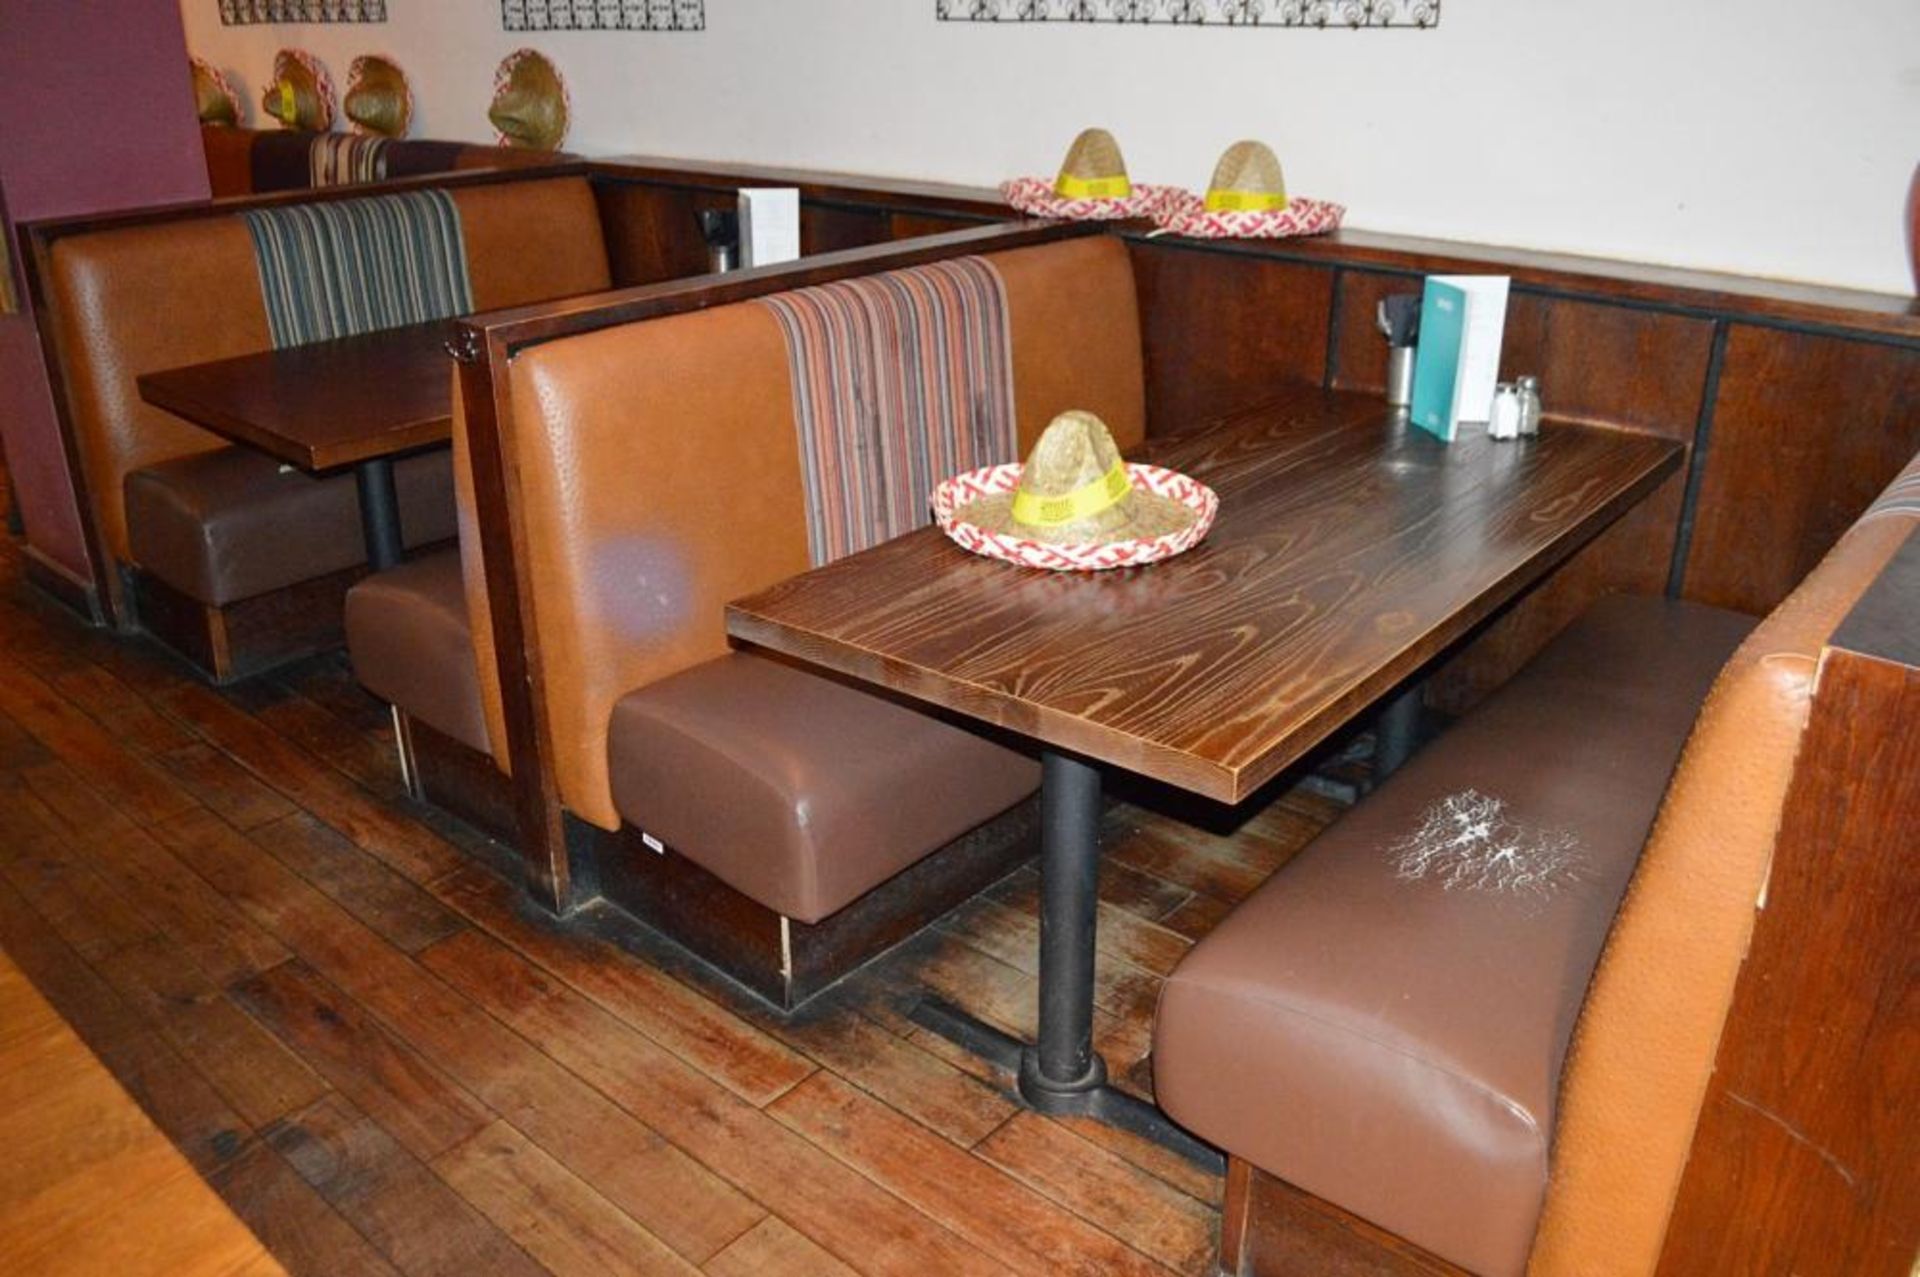 3 x Assorted Pieces Of Upholsted Restaurant Booth Seating - CL367 - Ref CQ-FB207 - Location: Manches